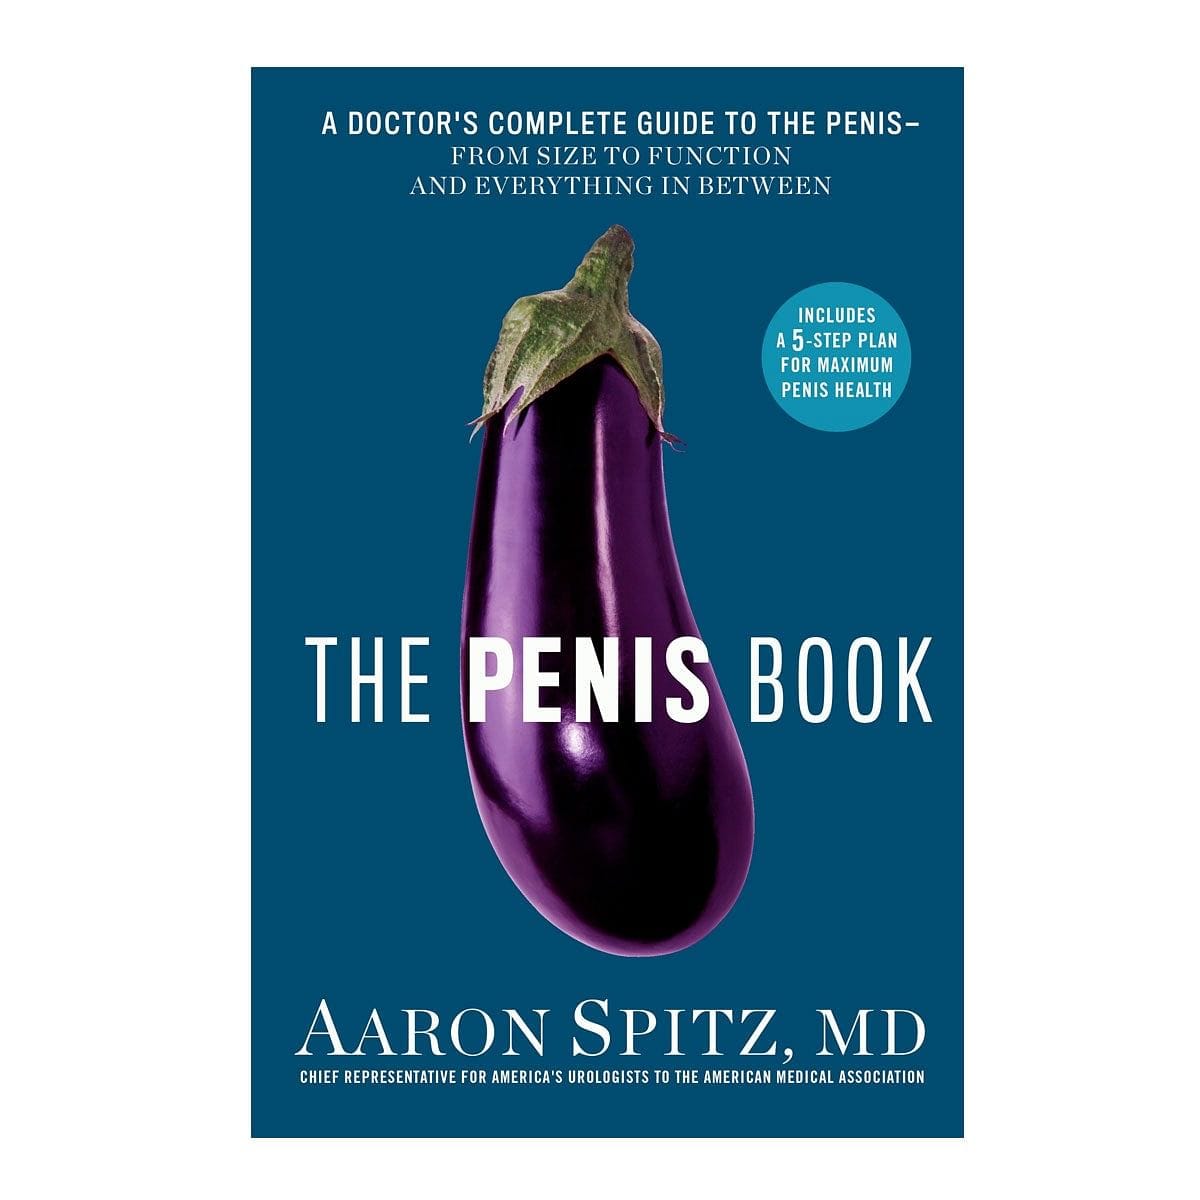 The Penis Book: A Doctor's Complete Guide to the Penis by Penguin - rolik